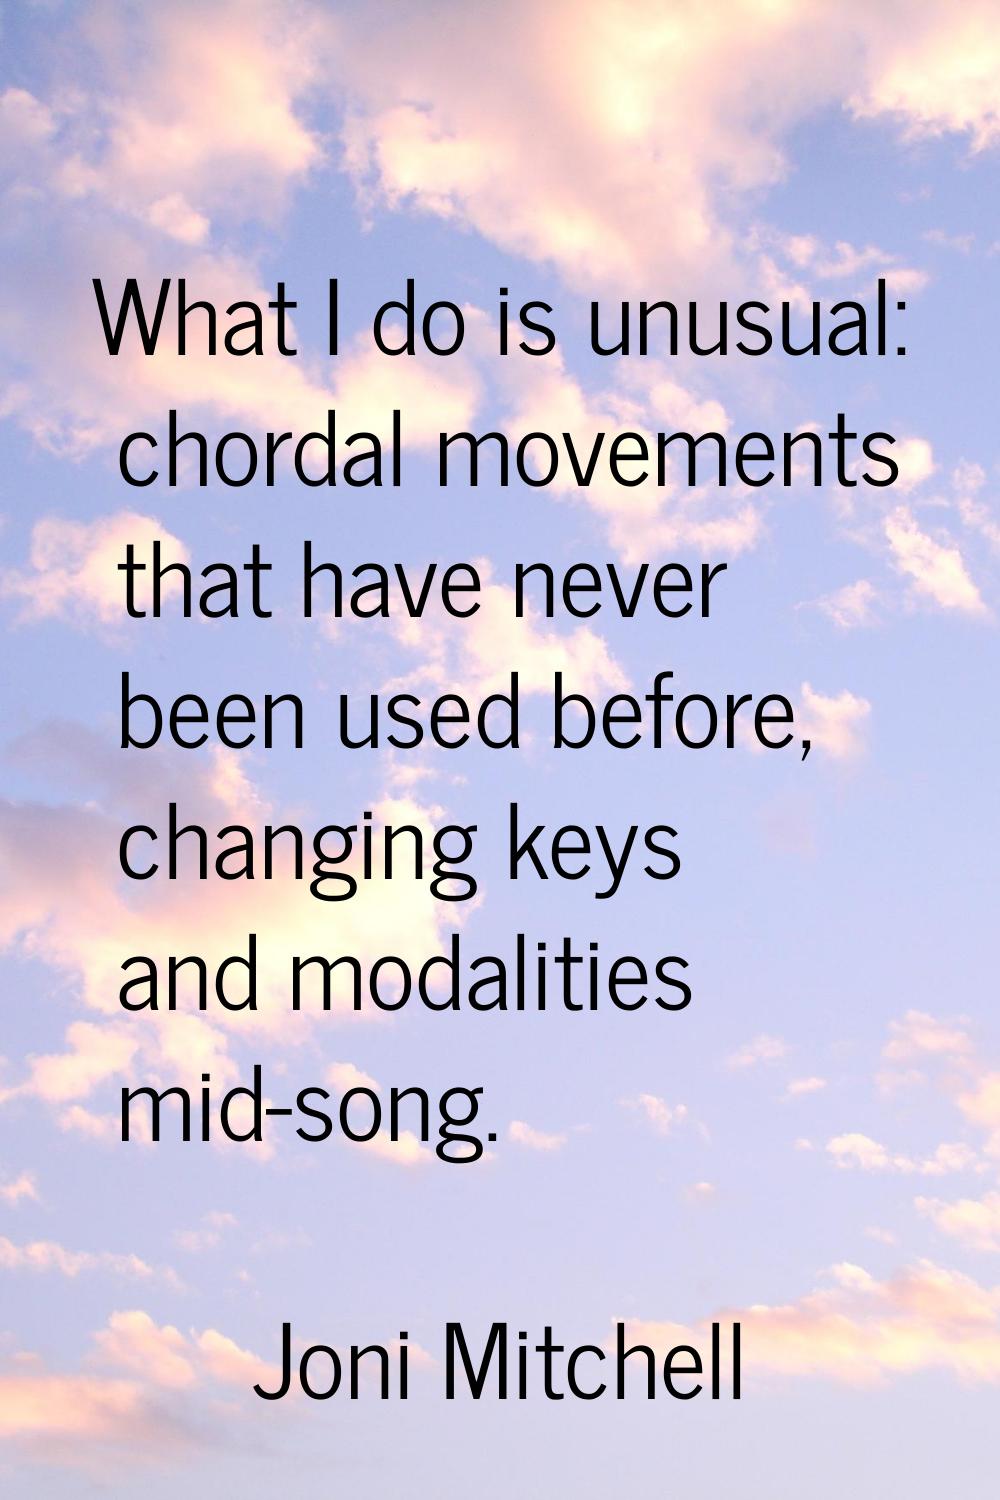 What I do is unusual: chordal movements that have never been used before, changing keys and modalit